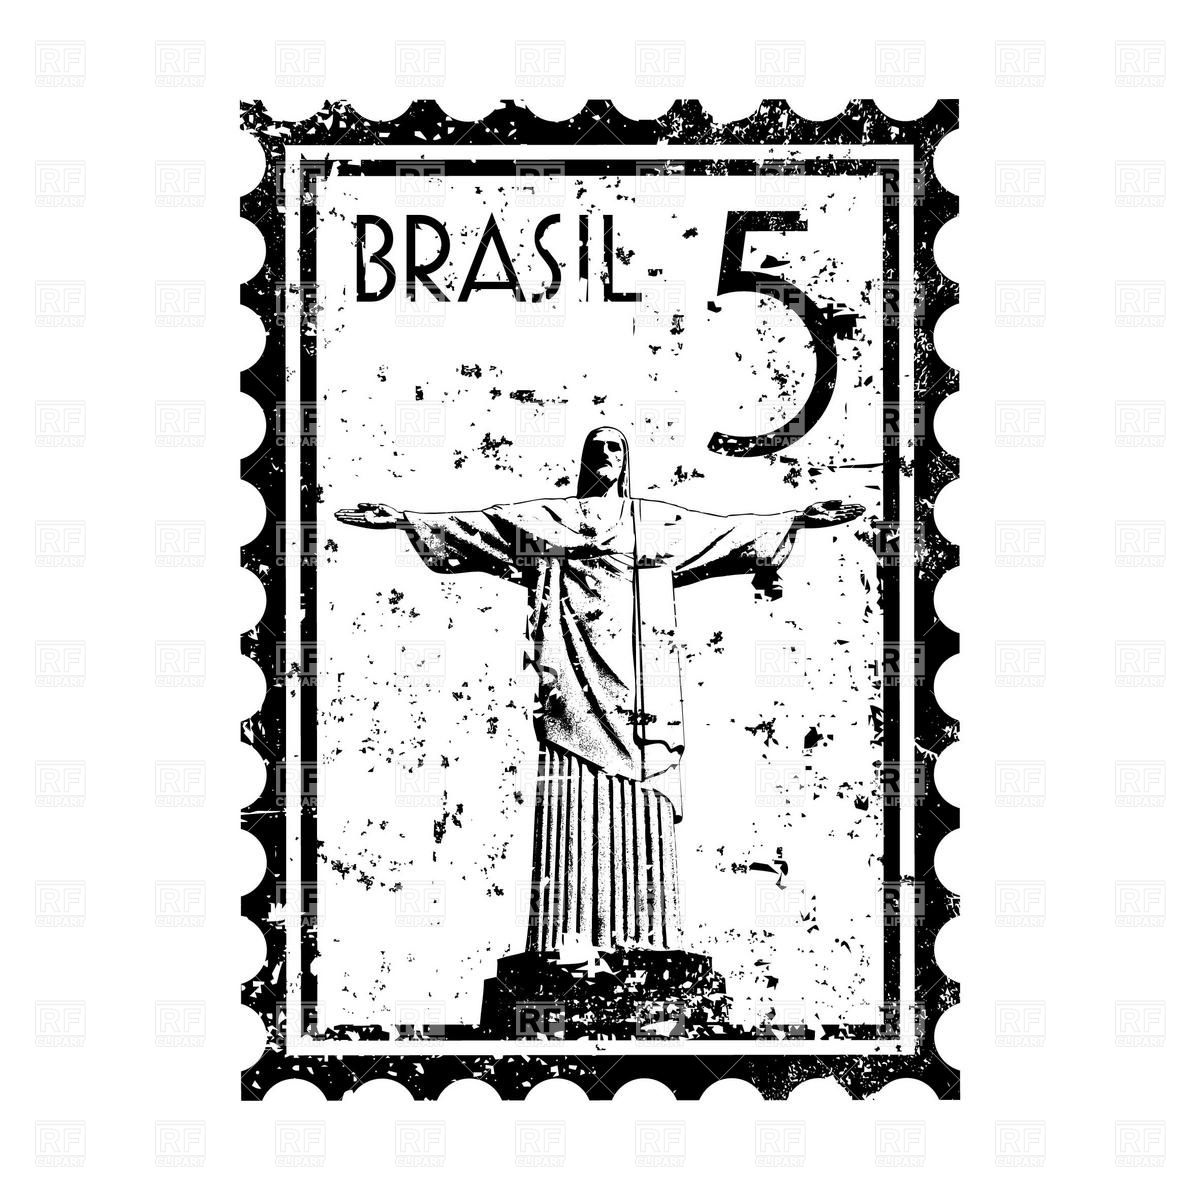 Postage Stamp With Statue Of Christ The Redeemer In Rio De Janeiro